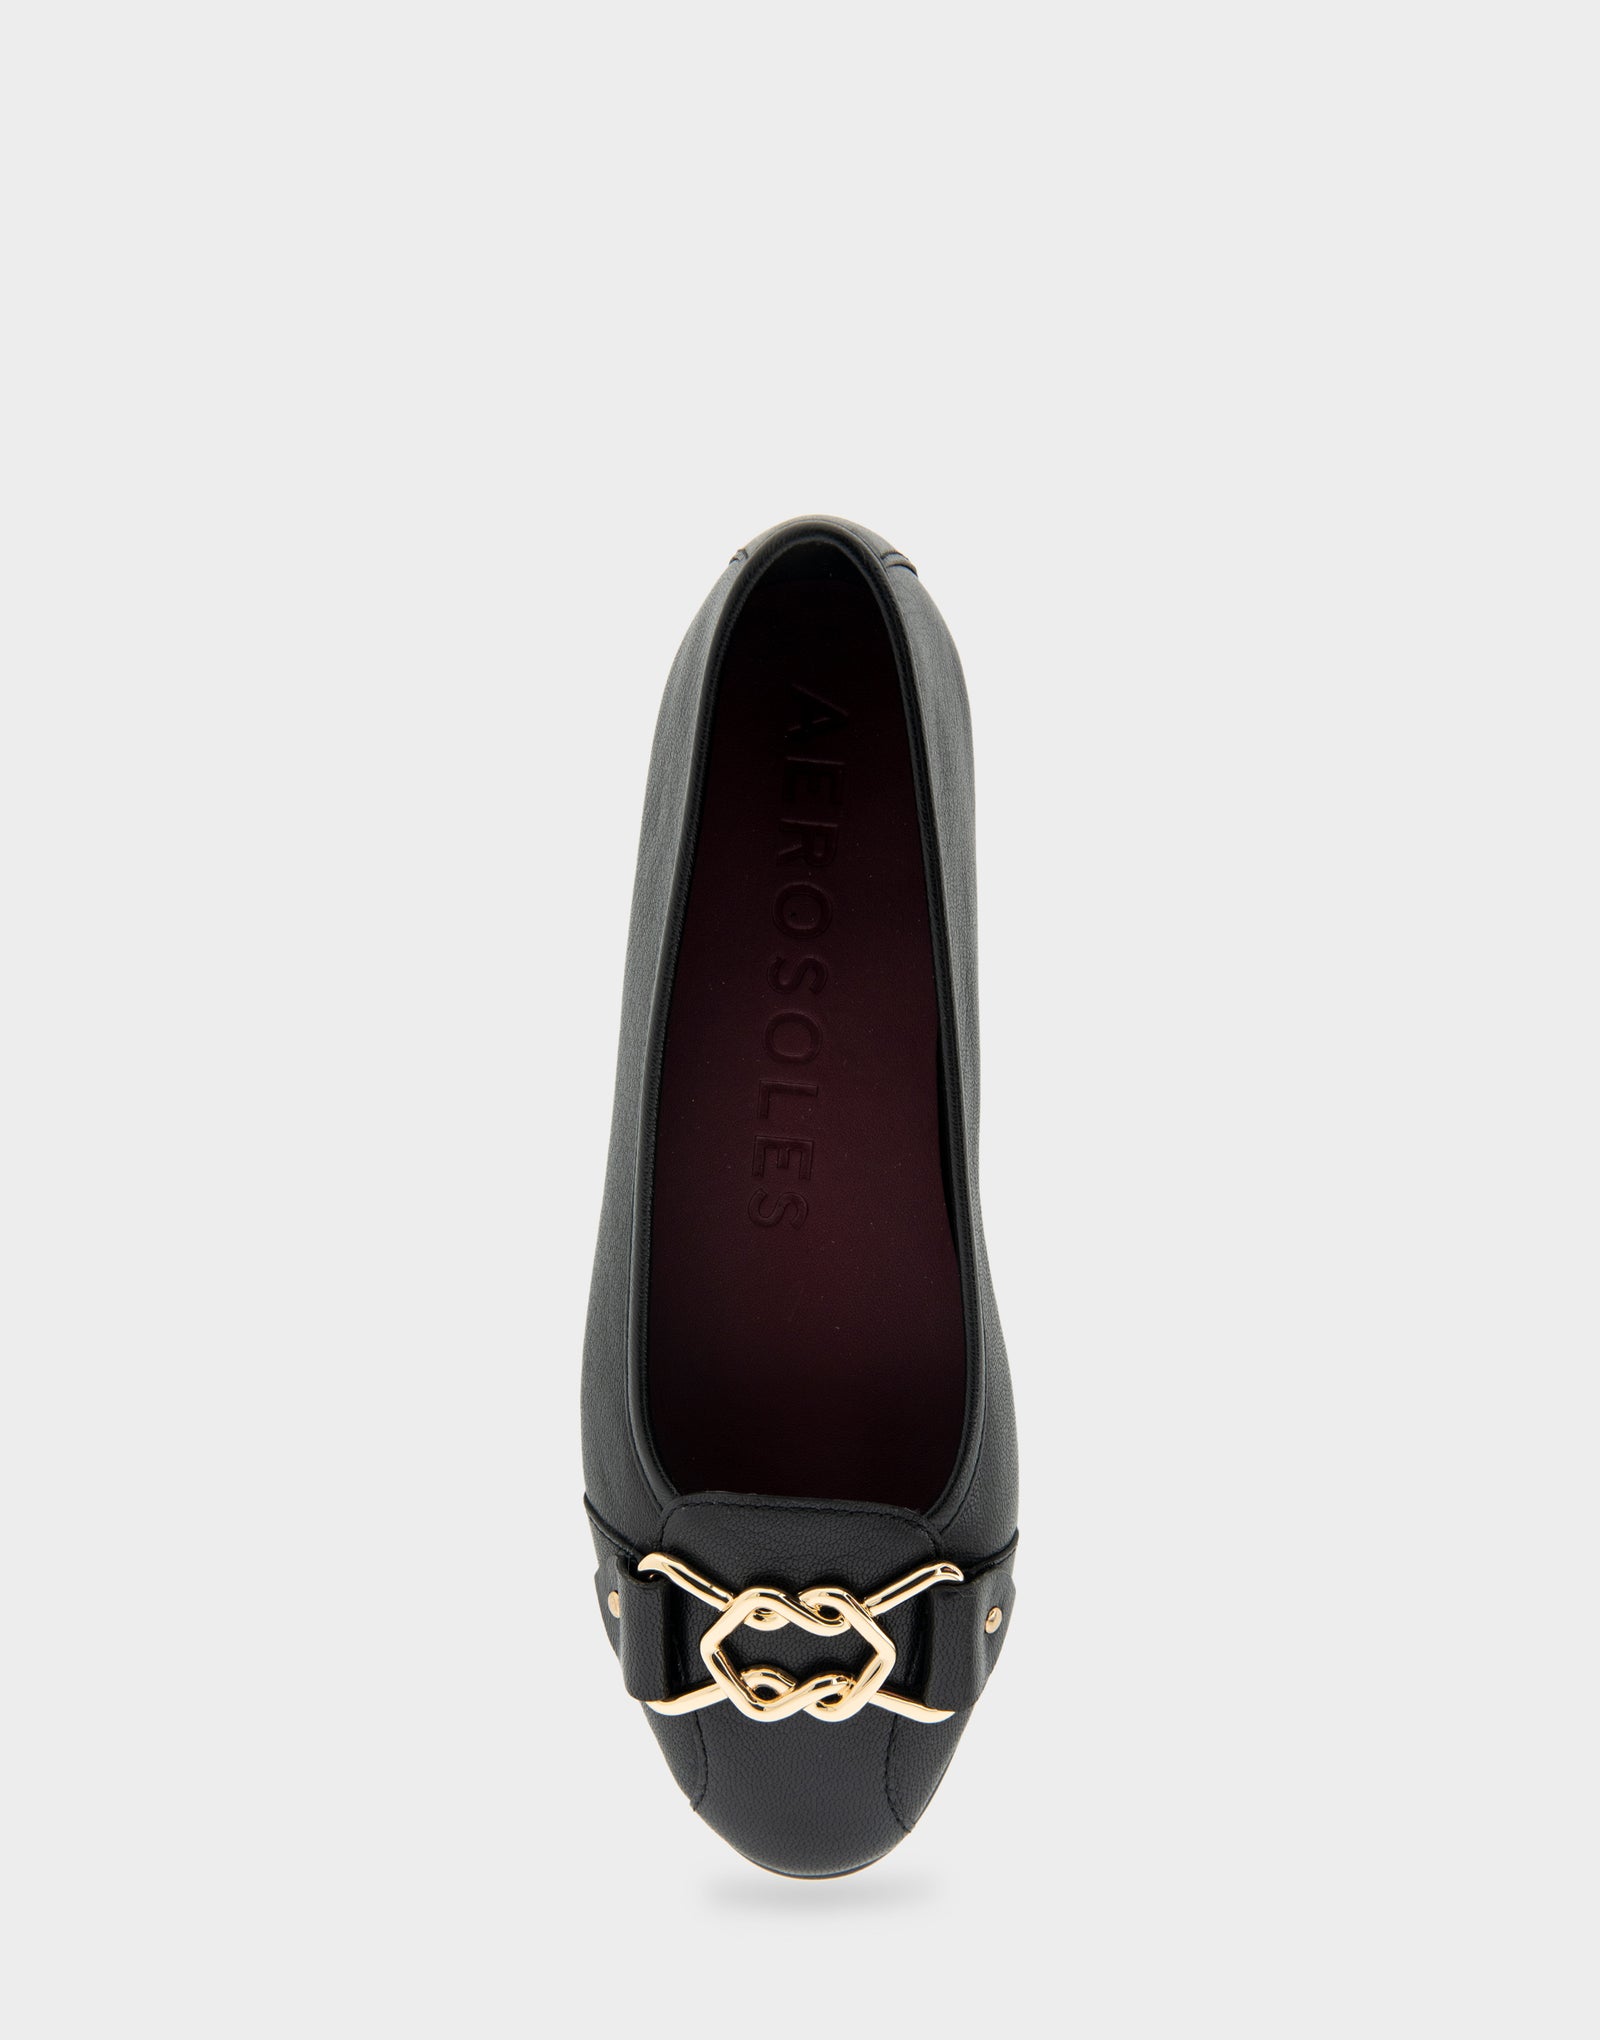 Women's Ornamented Flat in Black Leather